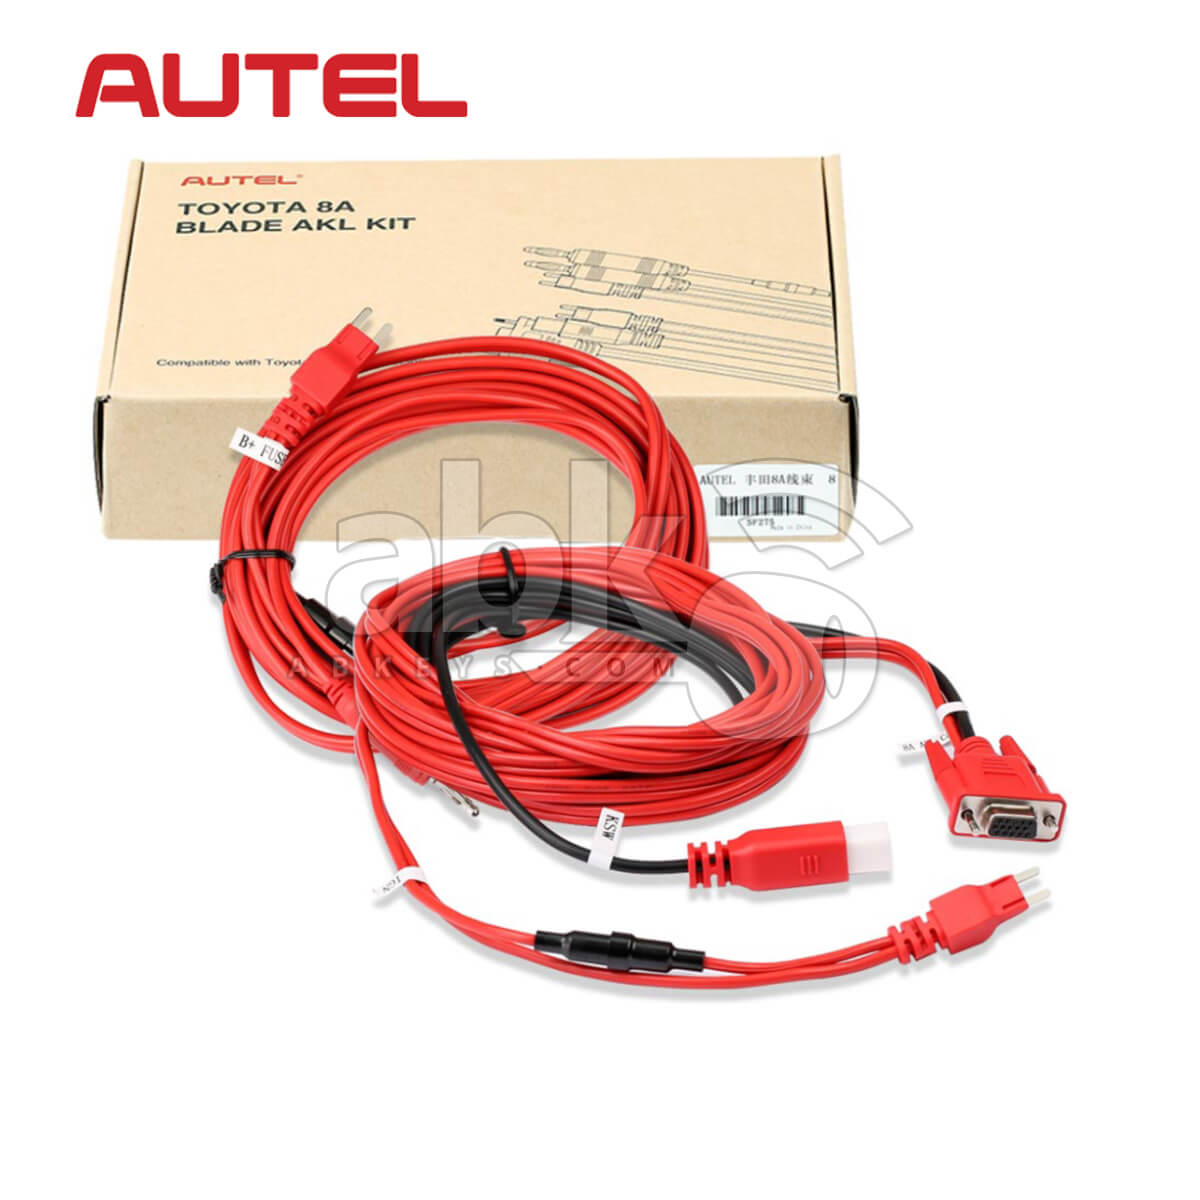 Autel Toyota 8A Cable For Toyota All Keys Lost AKL Kit - ABK-1388 - ABKEYS.COM